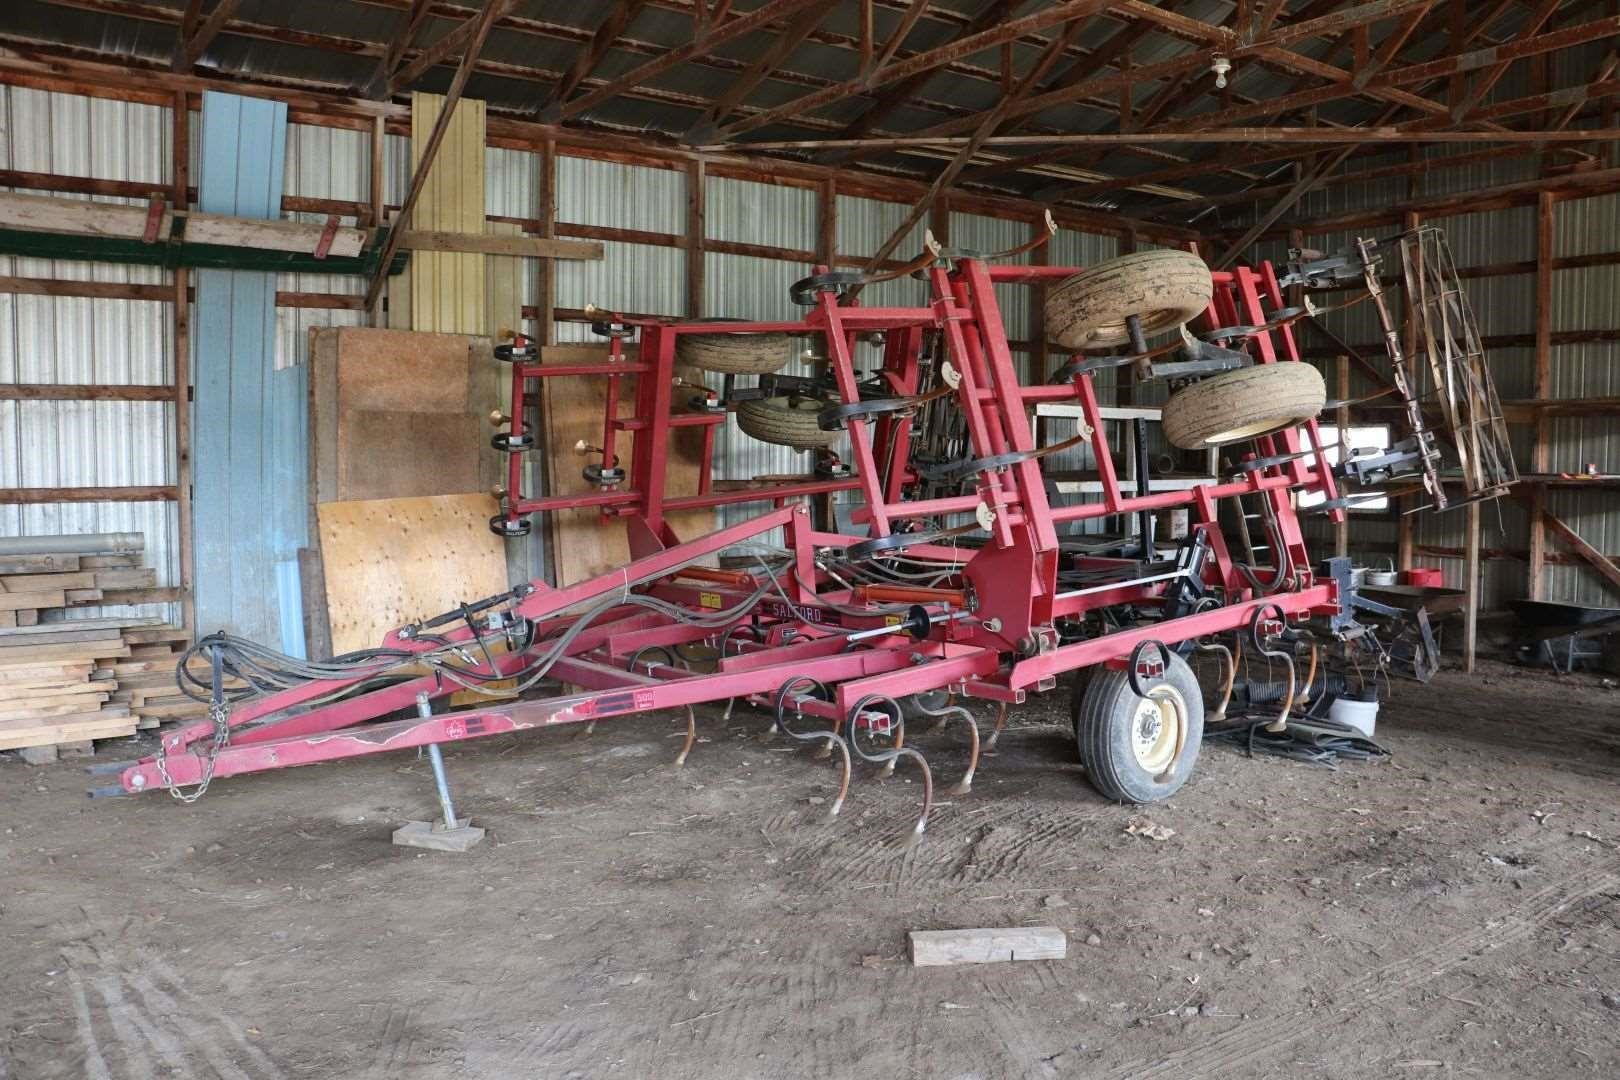 RAY MAR FARMS UNRESERVED AUCTION - MARCH 27TH @10AM